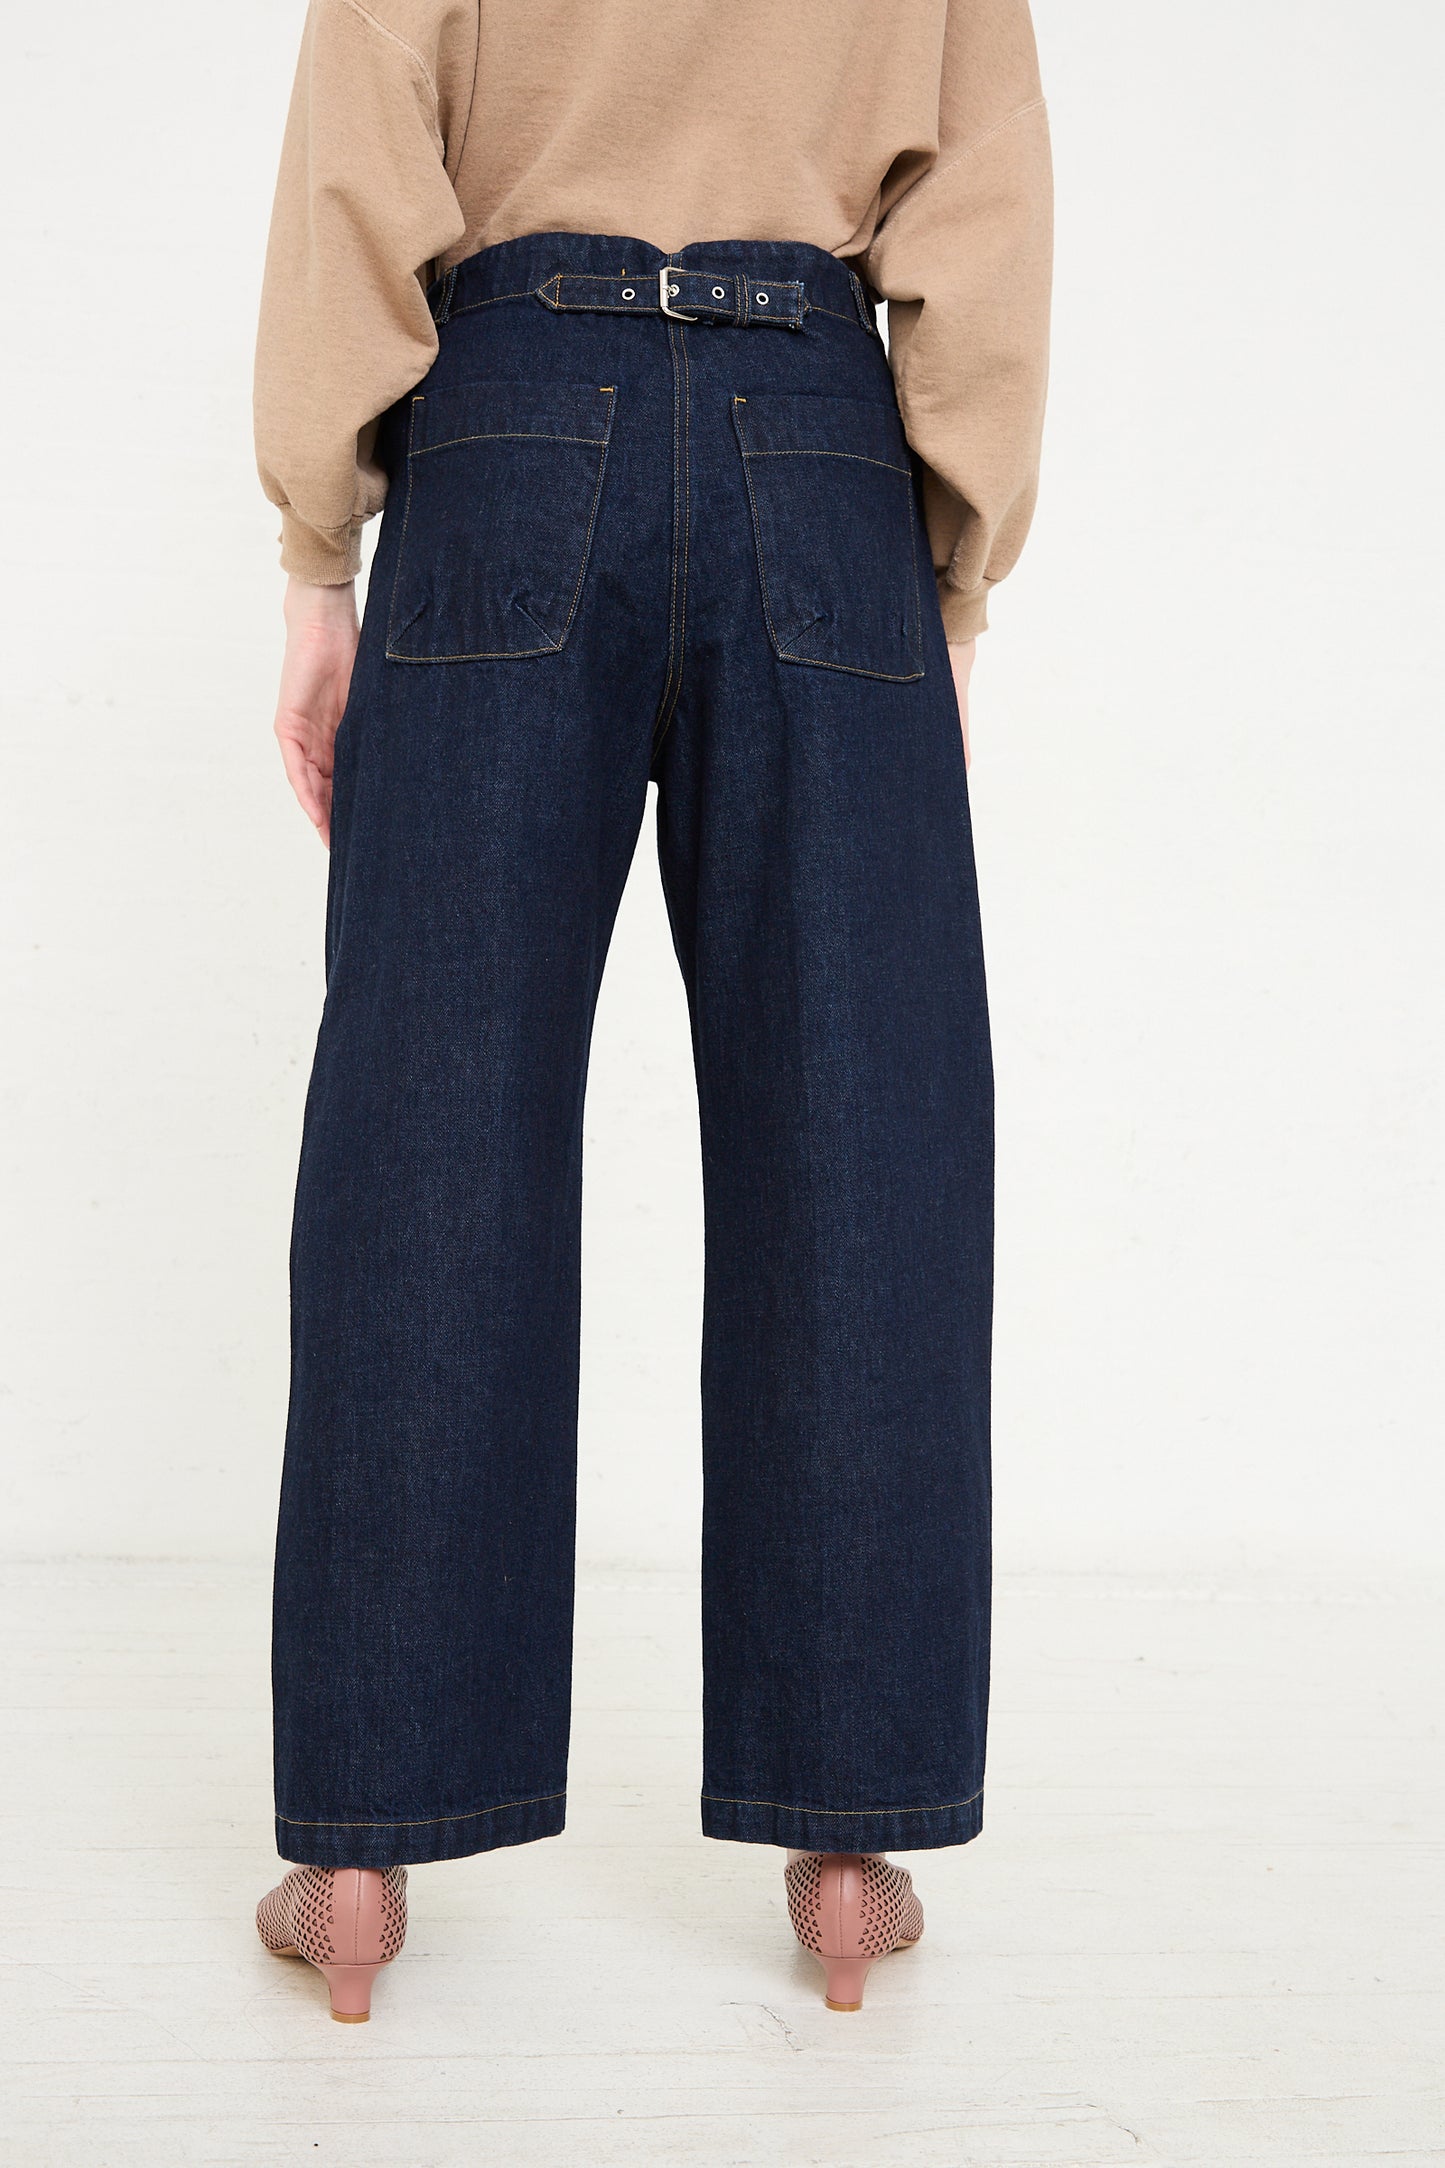 A rear view of a person wearing Rachel Comey's Handy Pant in Dark Indigo, paired with a brown belt, beige top, and mesh heels.